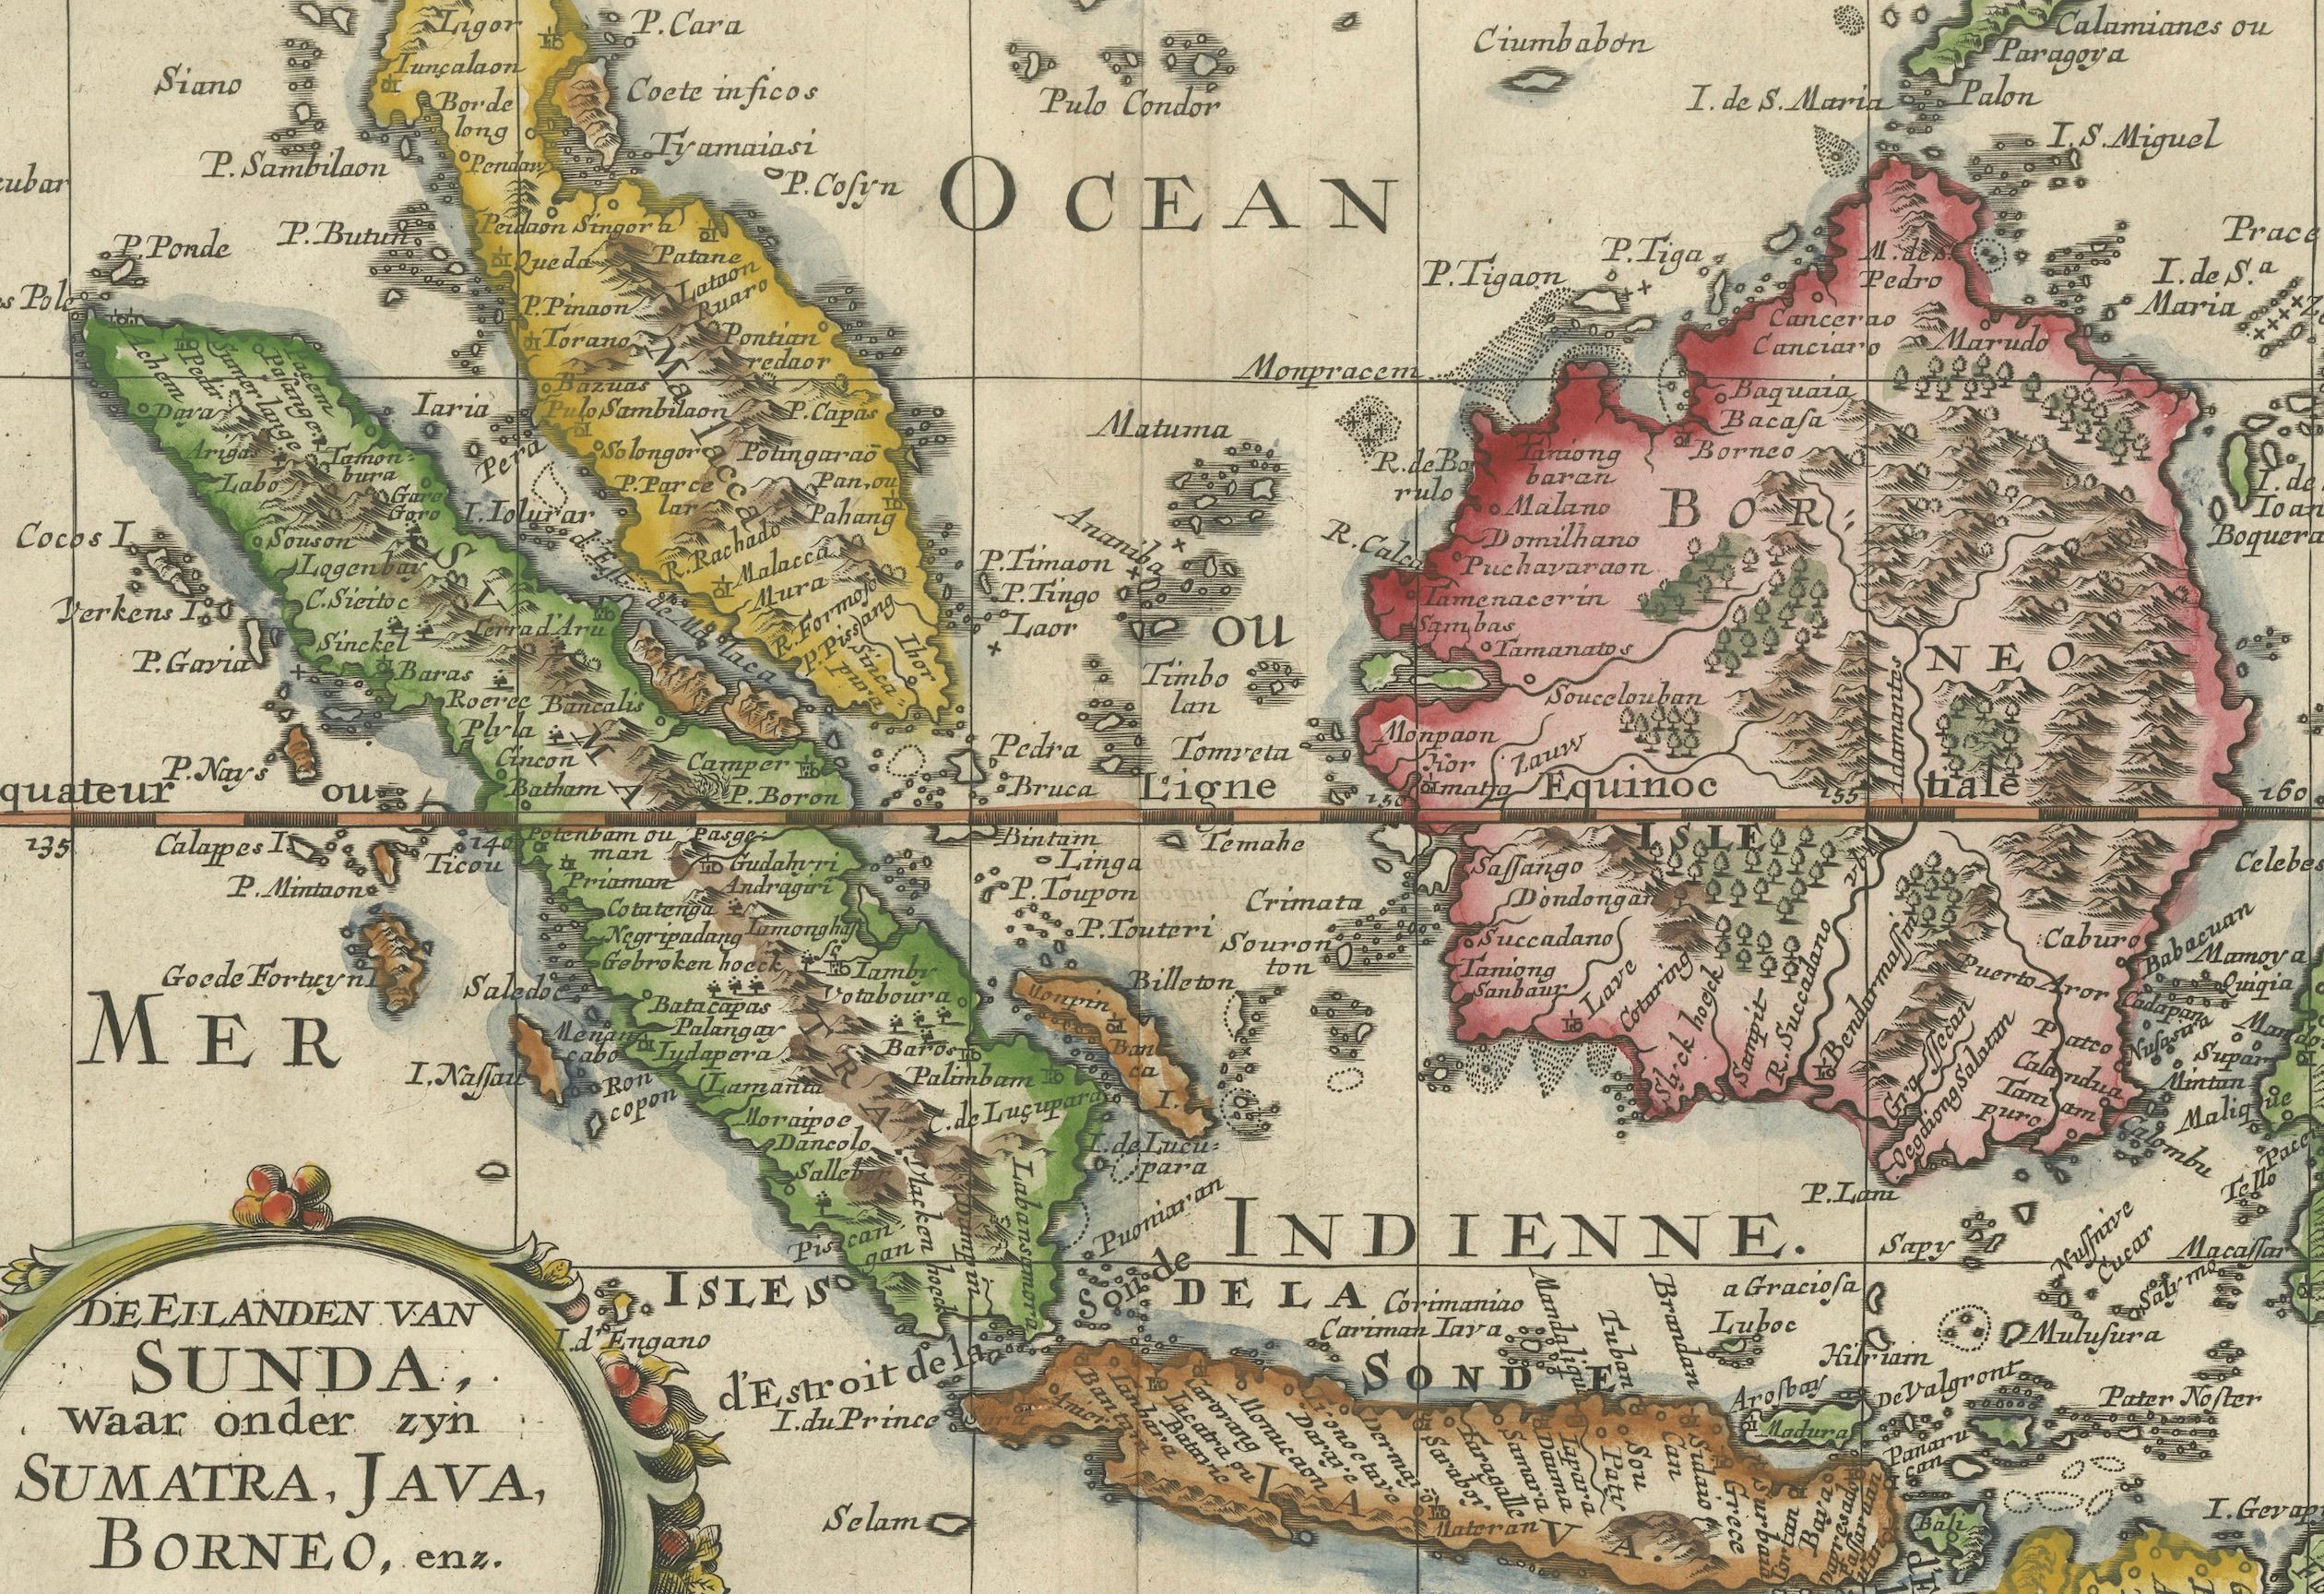 Title: “Antique Map of the Sunda Islands Including Sumatra, Java, and Borneo”

This print is a beautifully detailed and relatively rare map of Western Indonesia, encompassing the region historically known as the Sunda Islands. Created by the